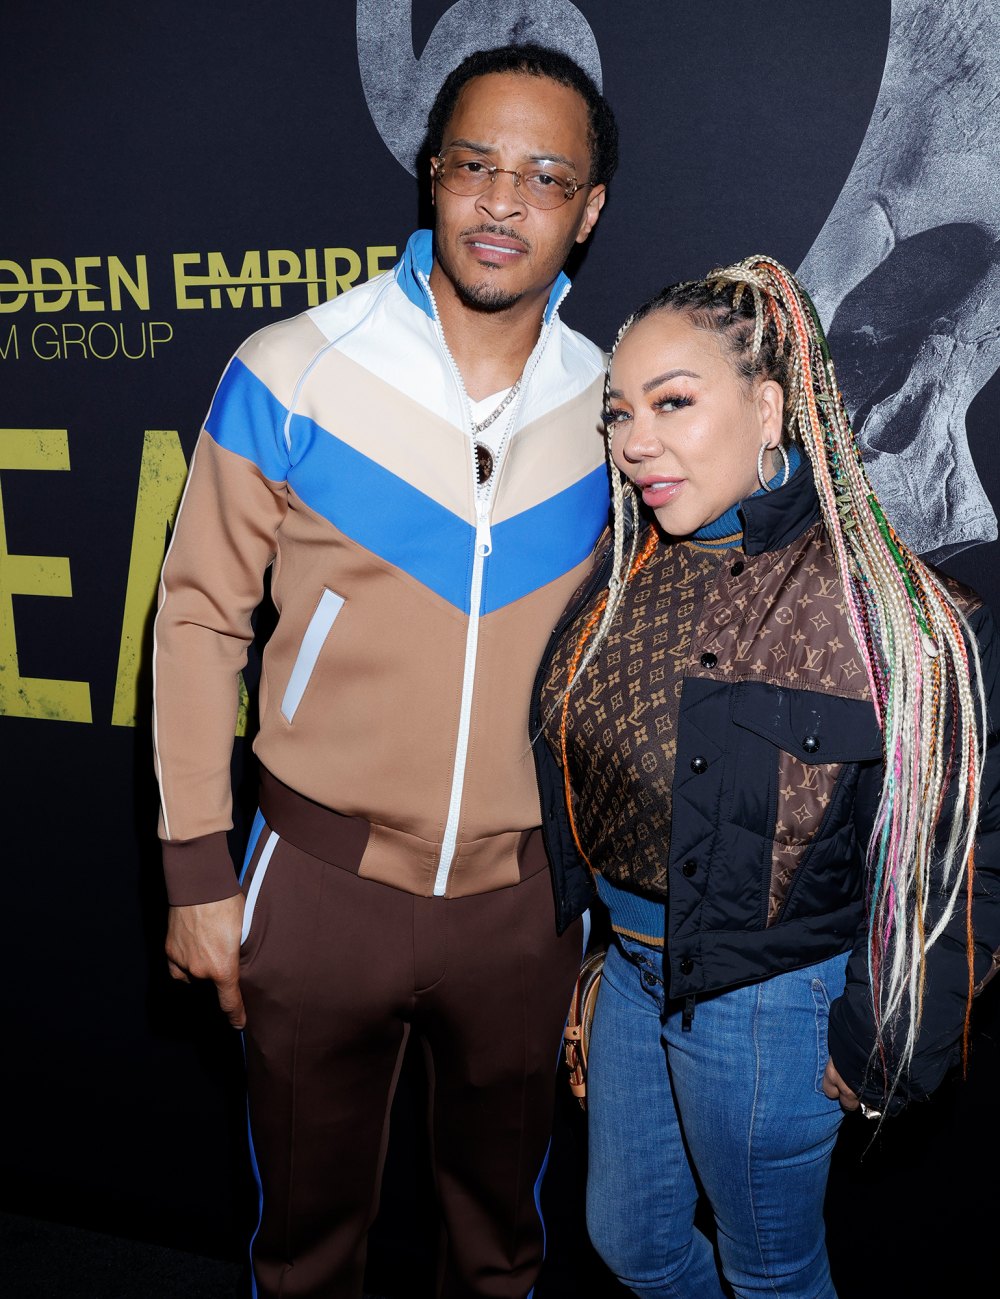 T.I. and Wife Tiny Accused of Sexual Assault in Lawsuit